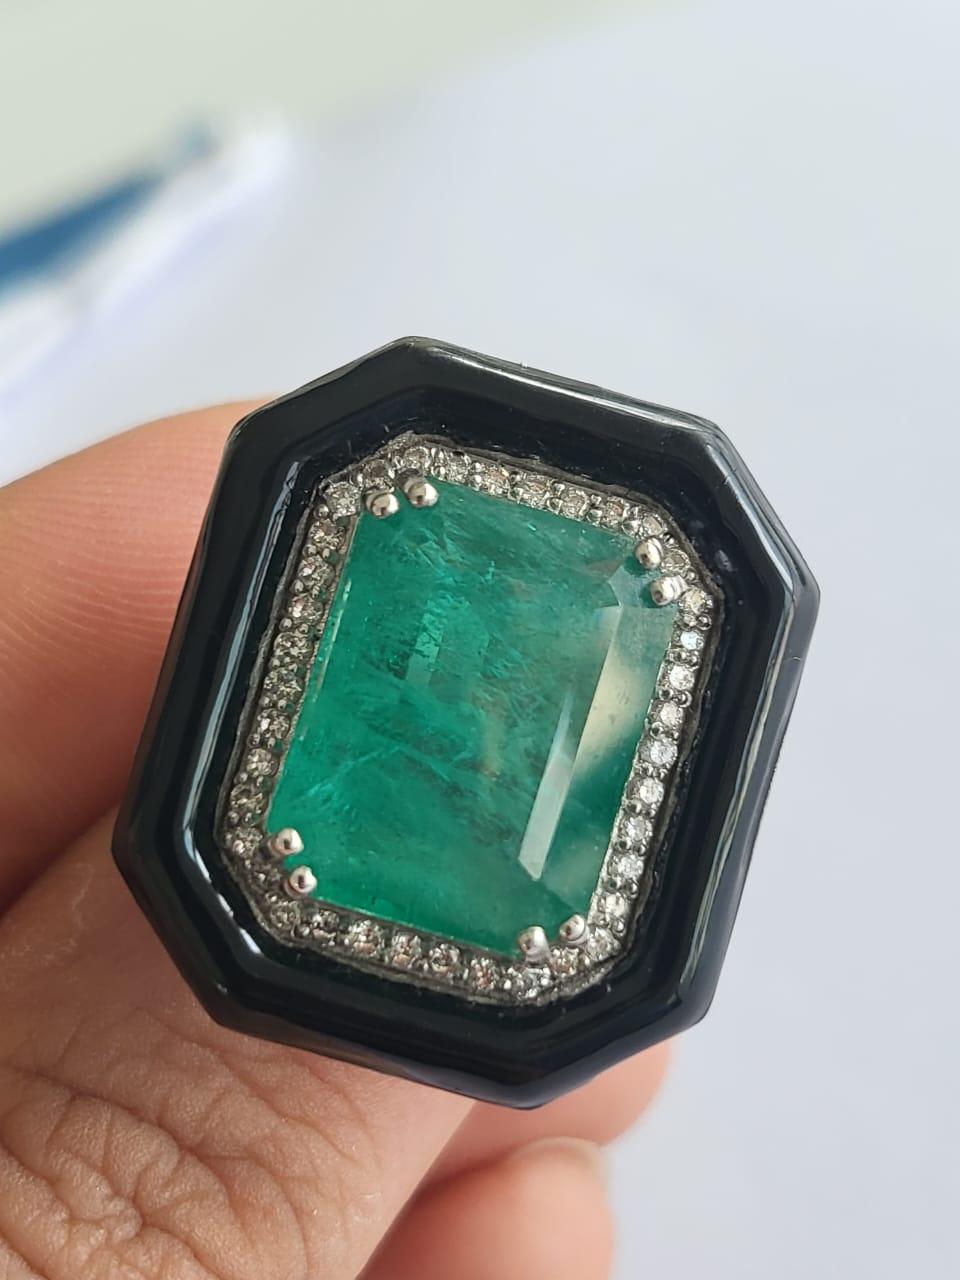 A very gorgeous and beautiful, Emerald & Black Enamel Cocktail / Engagement Ring set in 18K Gold & Diamonds. The weight of the Emerald is 11.2 carats. The Emerald is completely natural, without any treatment & is of Zambian origin. The weight of the